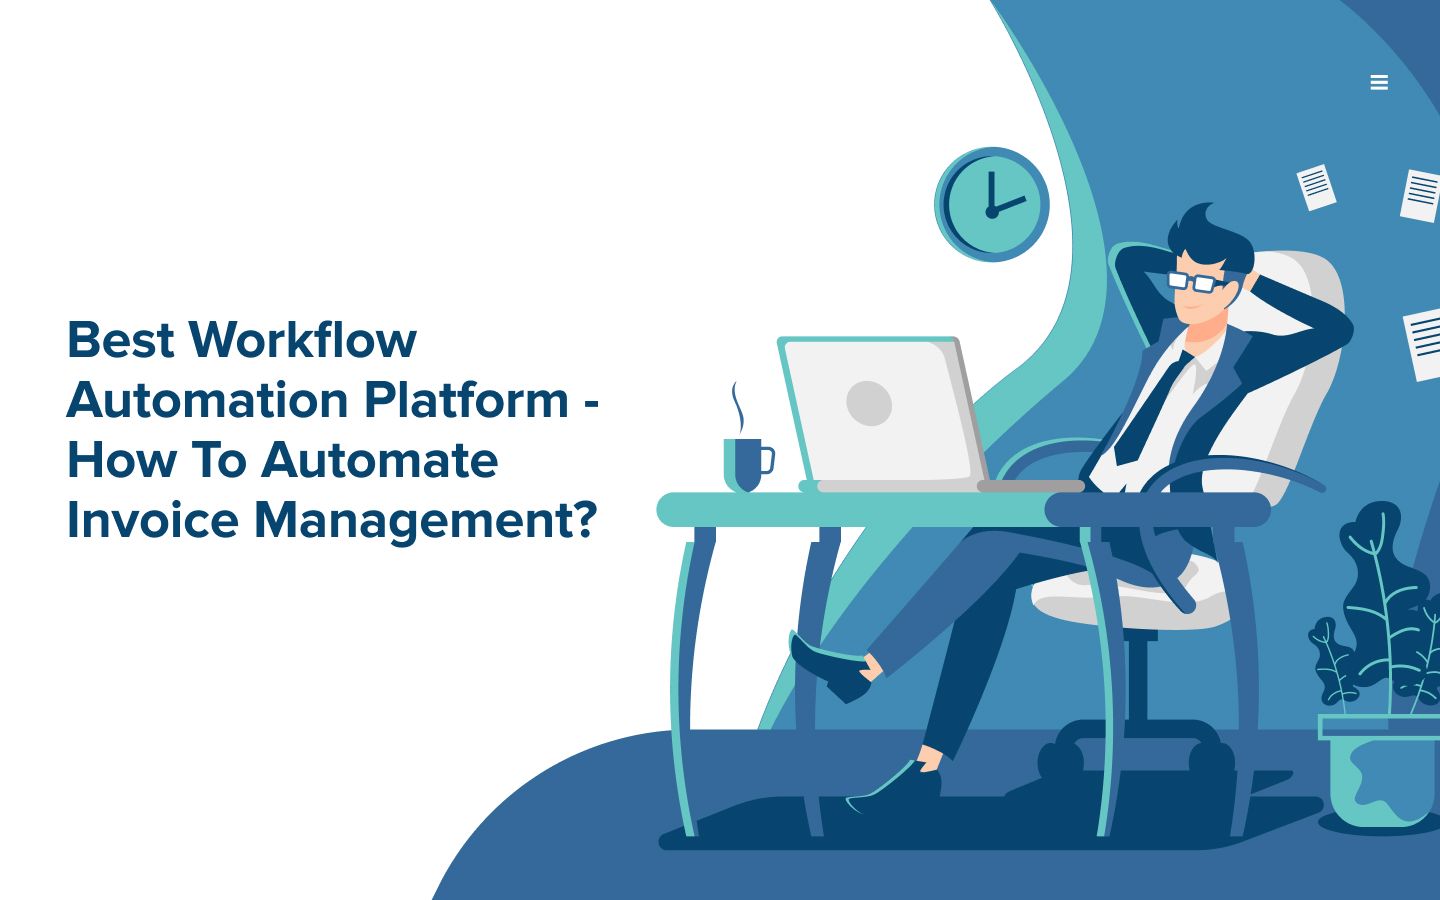 Best Workflow Automation Platform - How To Automate Invoice Management?